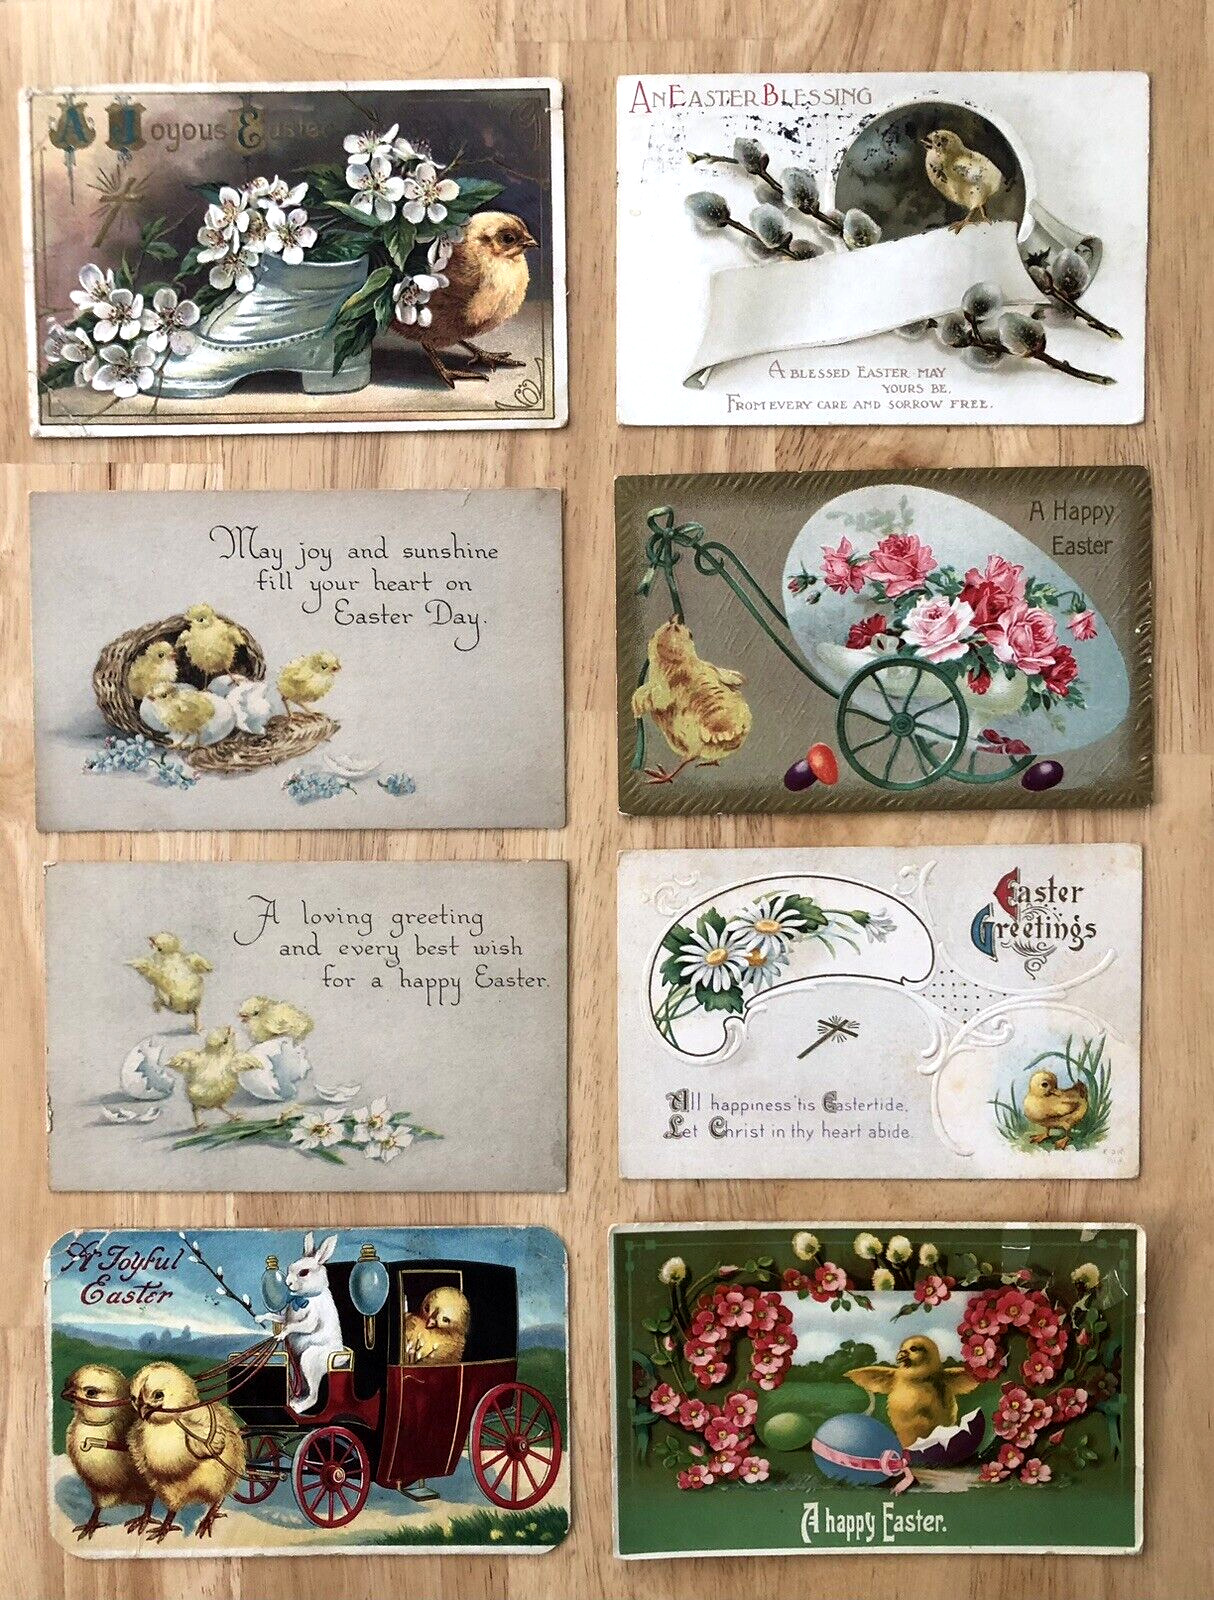 ANTIQUE EARLY 1900s LOT OF 8 EASTER CHICK POSTCARDS - 4 WITH 1 CENT STAMPS